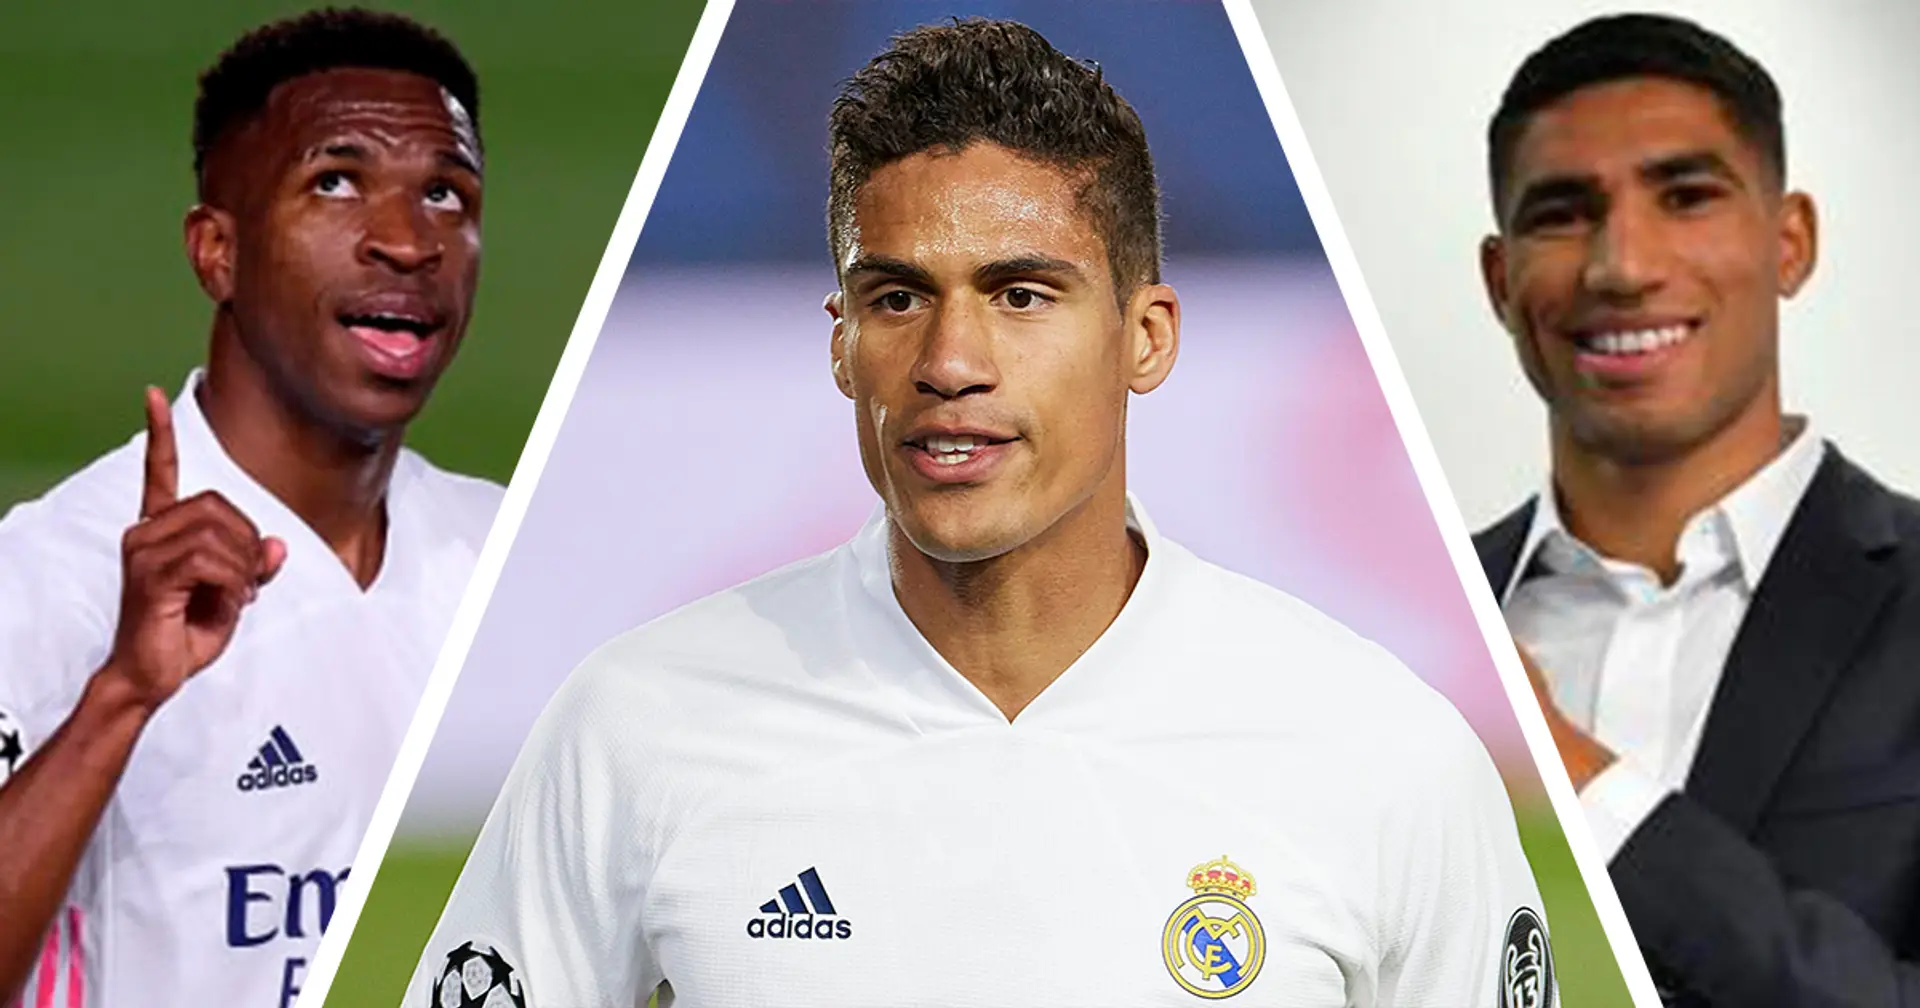 Mbappe, Vinicius Jr and 5 more names in Real Madrid's transfer round-up with probability ratings